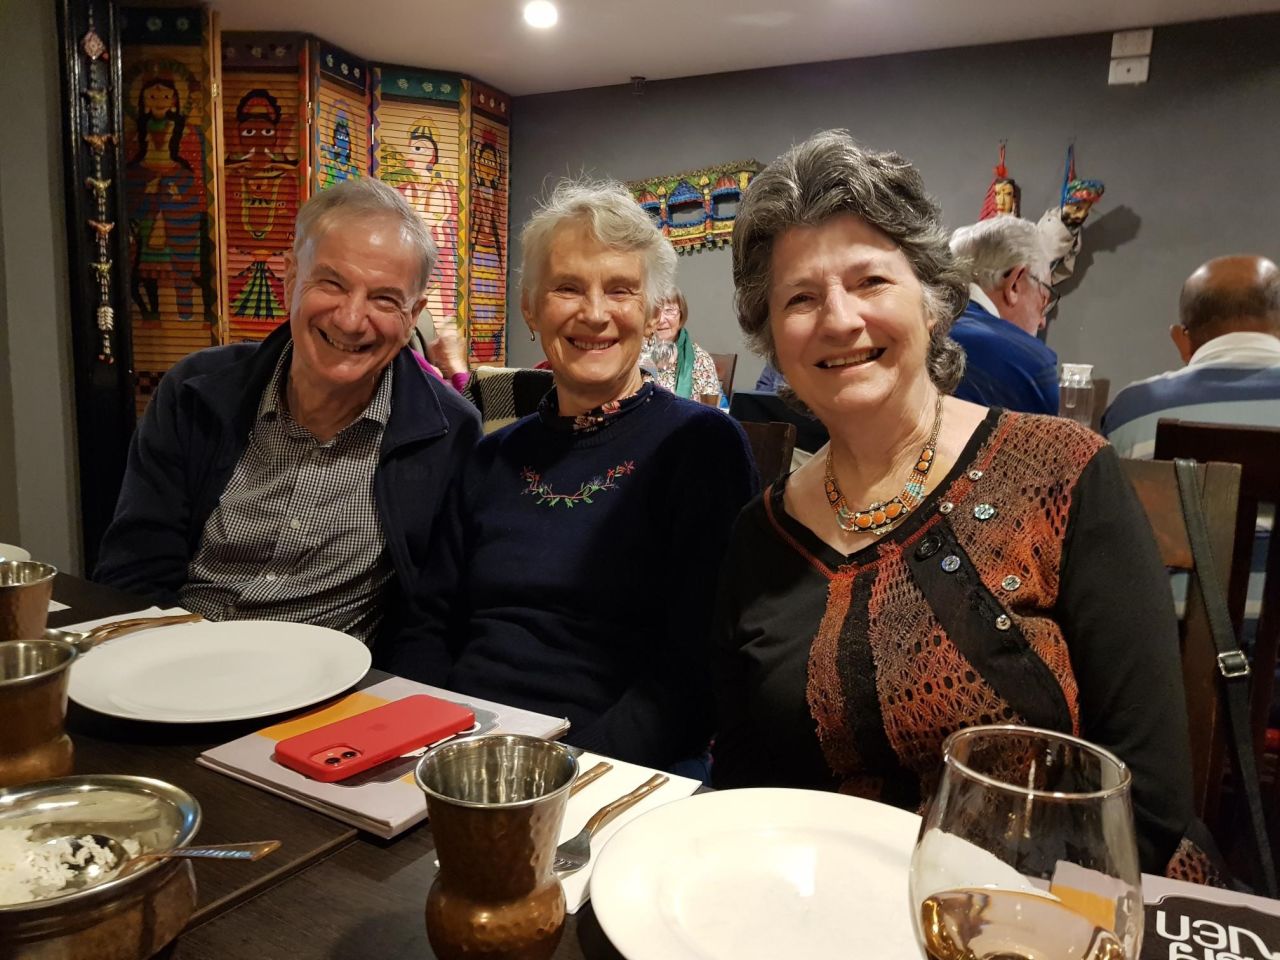 NSA NFB Dinner July 2023.

Good company and delicious curries at Klay Oven in Florence Street.